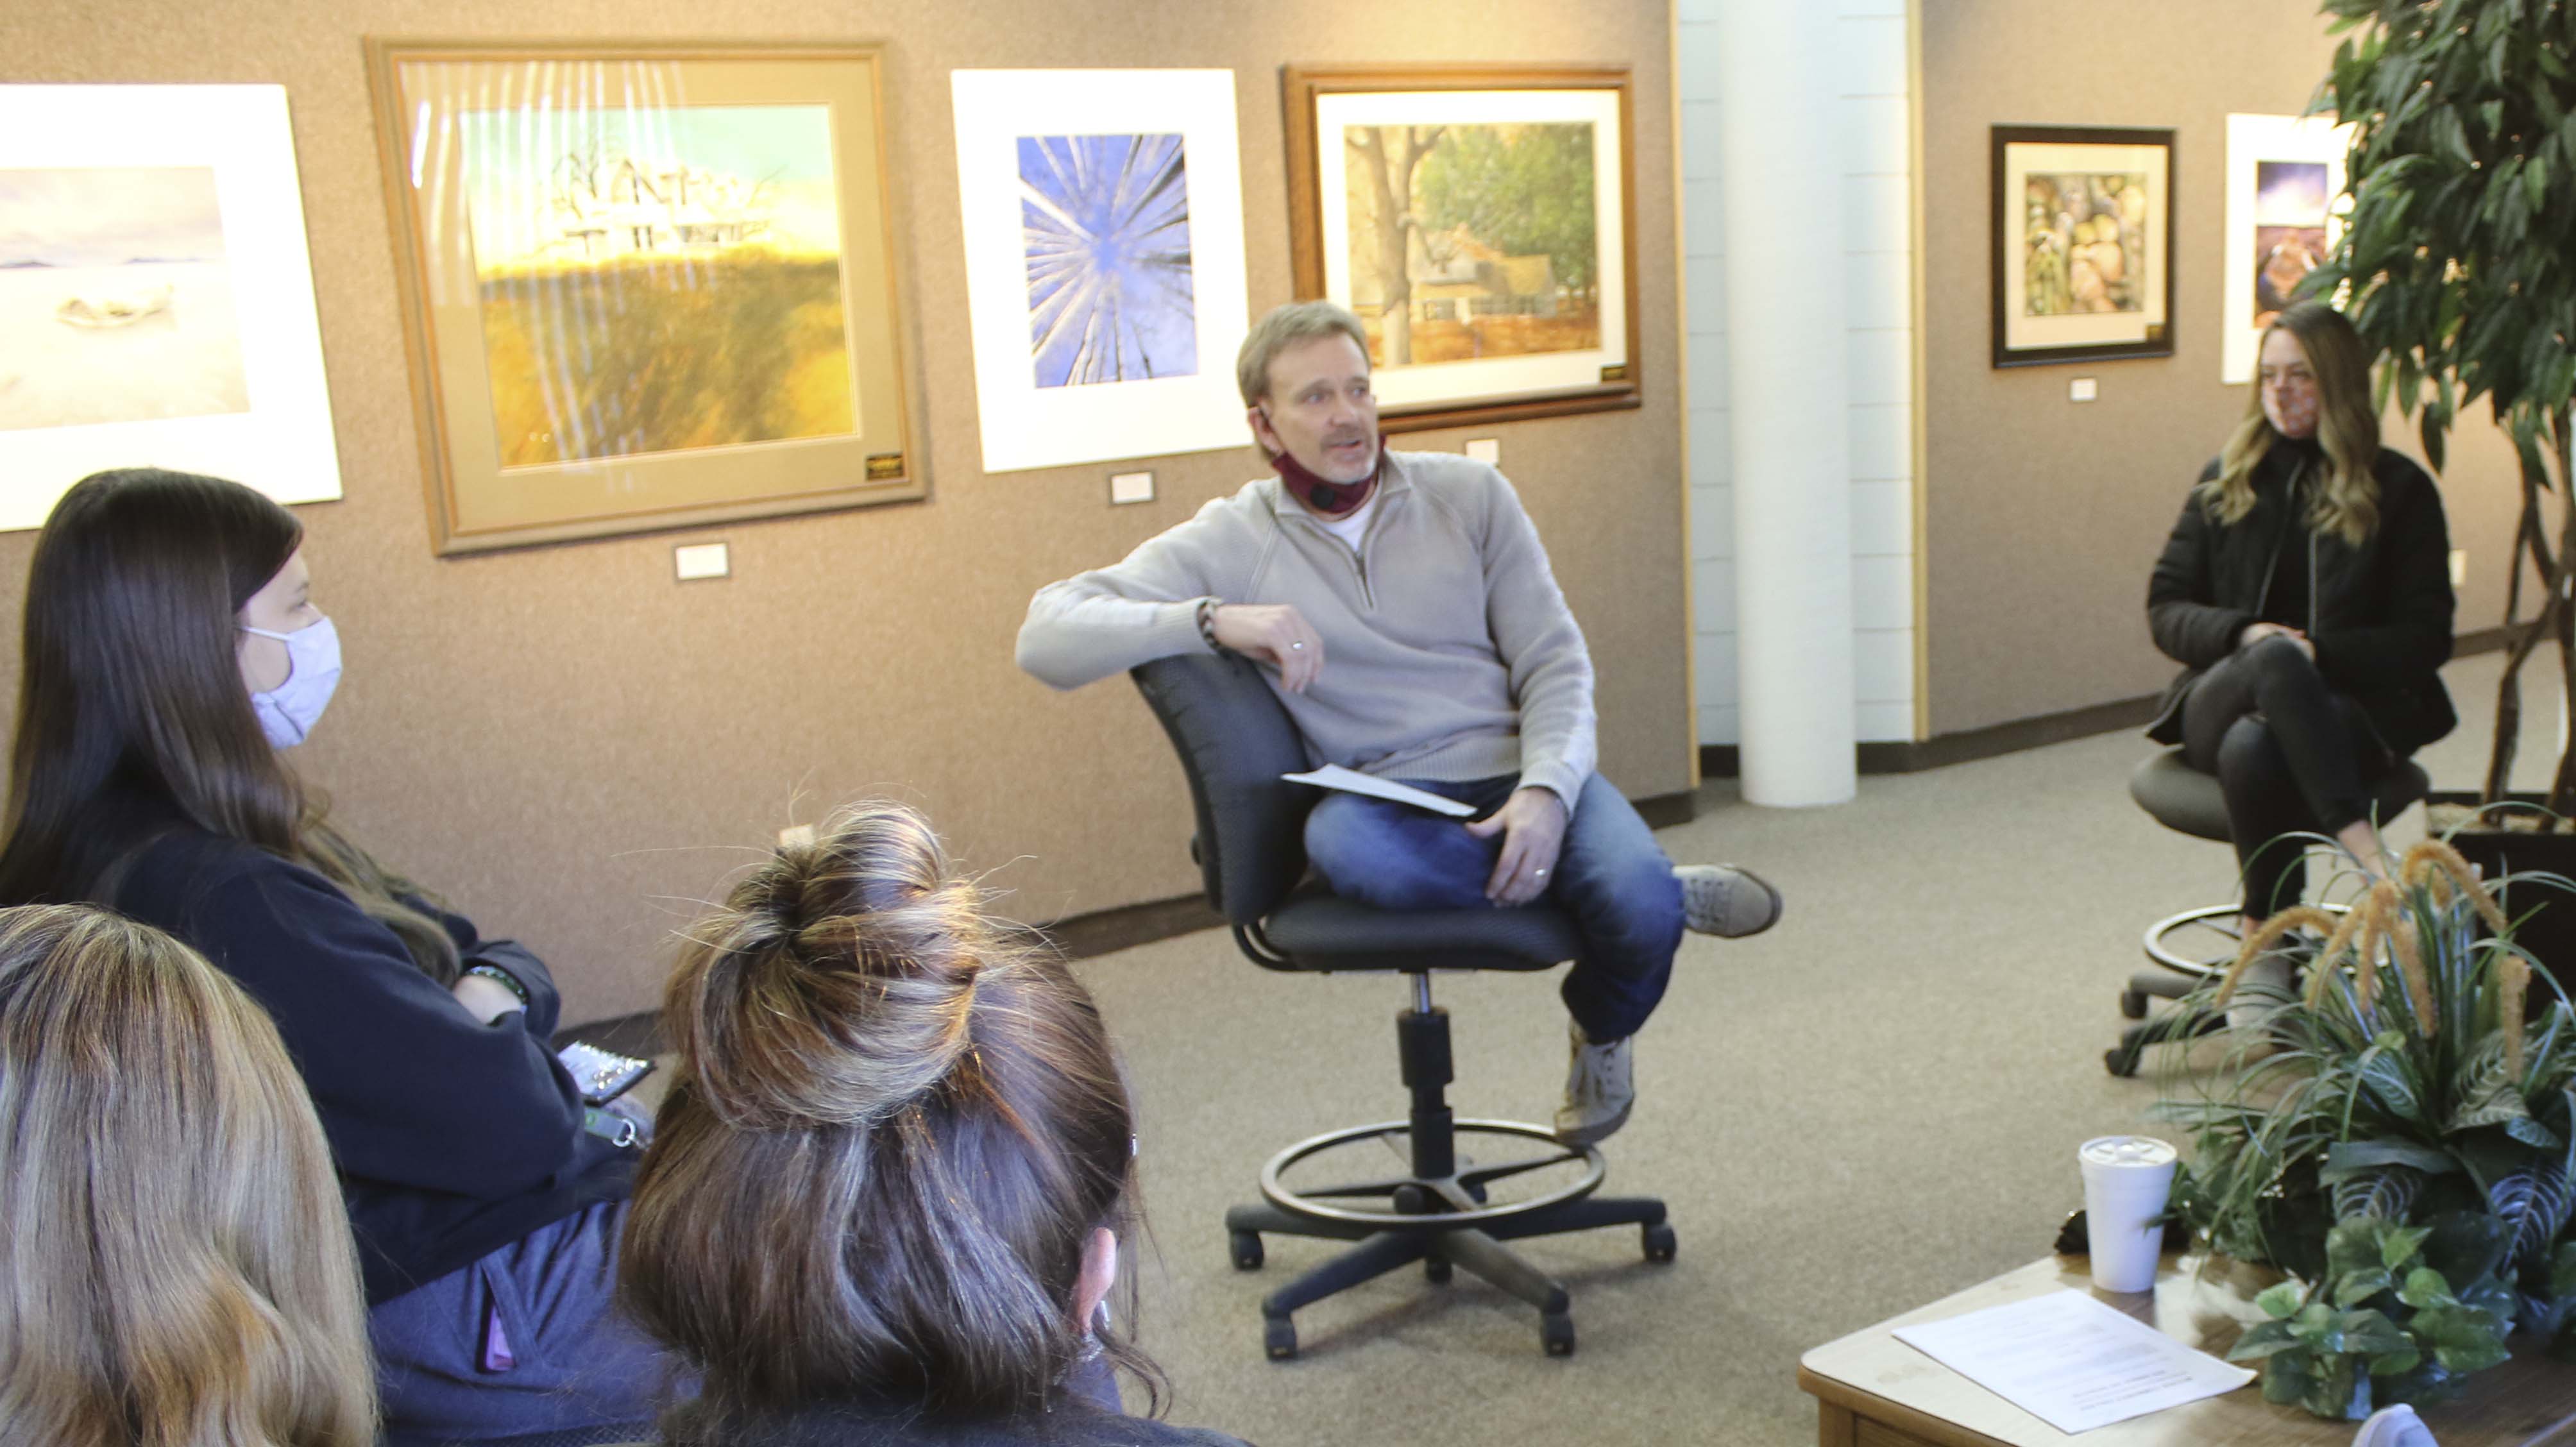 Rick Johnson speaks to MCC students about his works